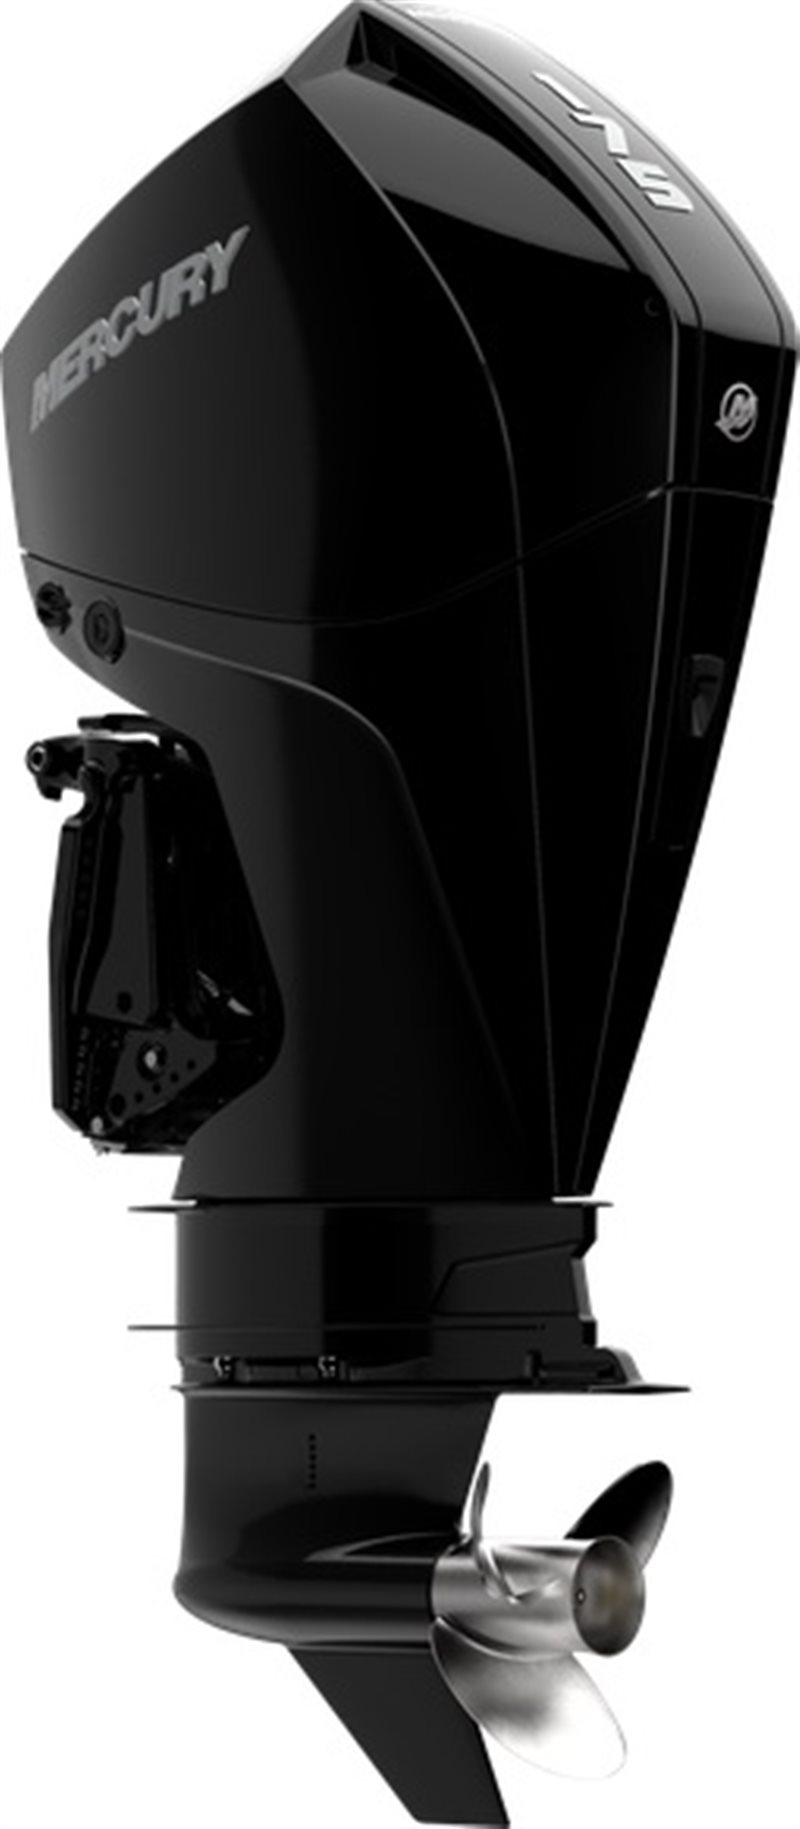 2021 Mercury Outboard Fourstroke 175 - 300 250 HP at Fort Fremont Marine